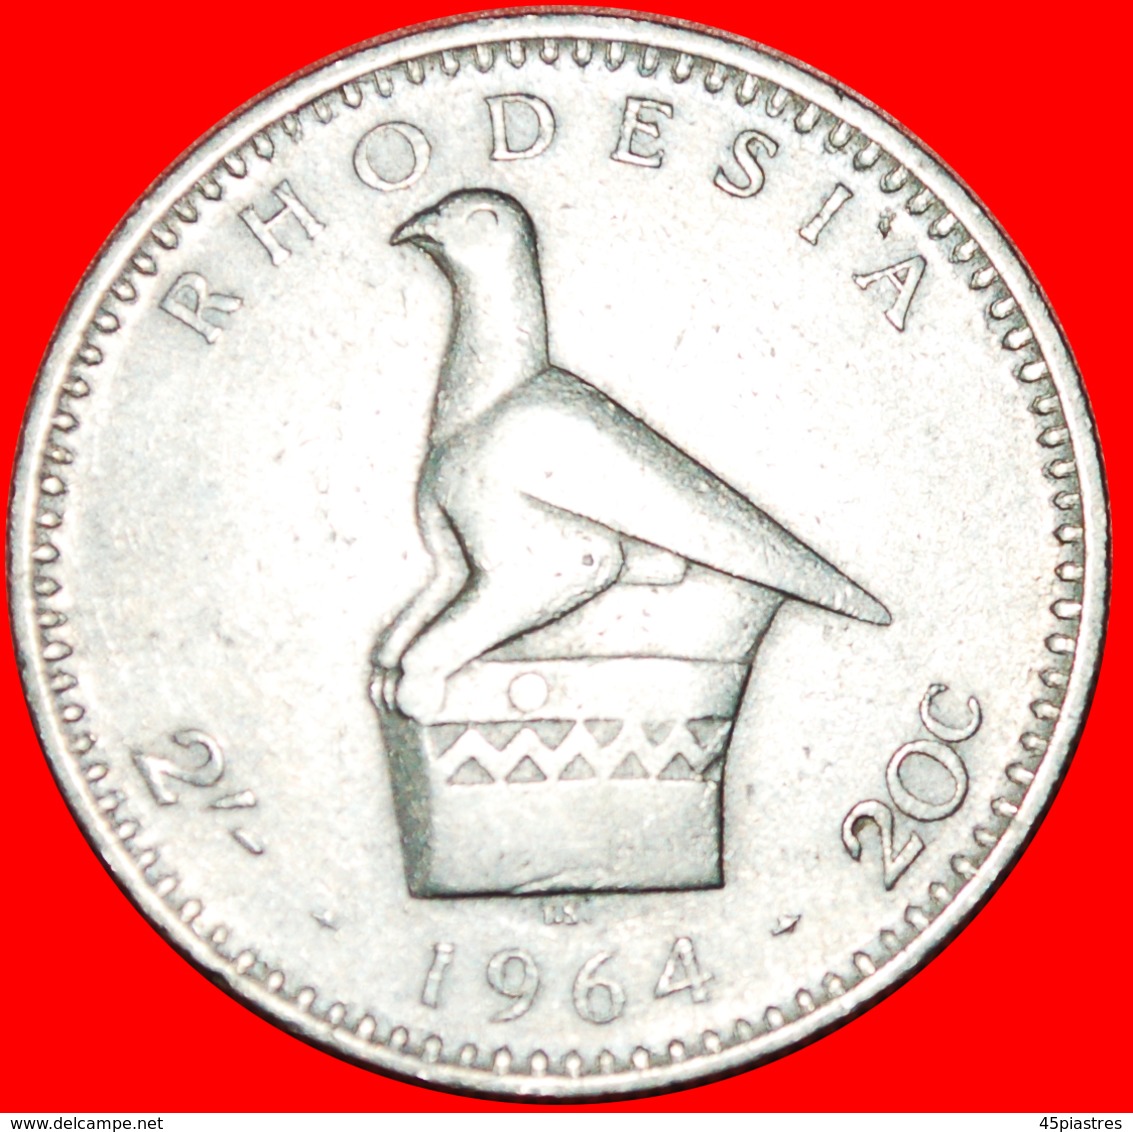 + SOUTH AFRICA : RHODESIA ★ 2 SHILLINGS  20 CENTS 1964 BIRD! LOW START ★ NO RESERVE! - Rhodesien